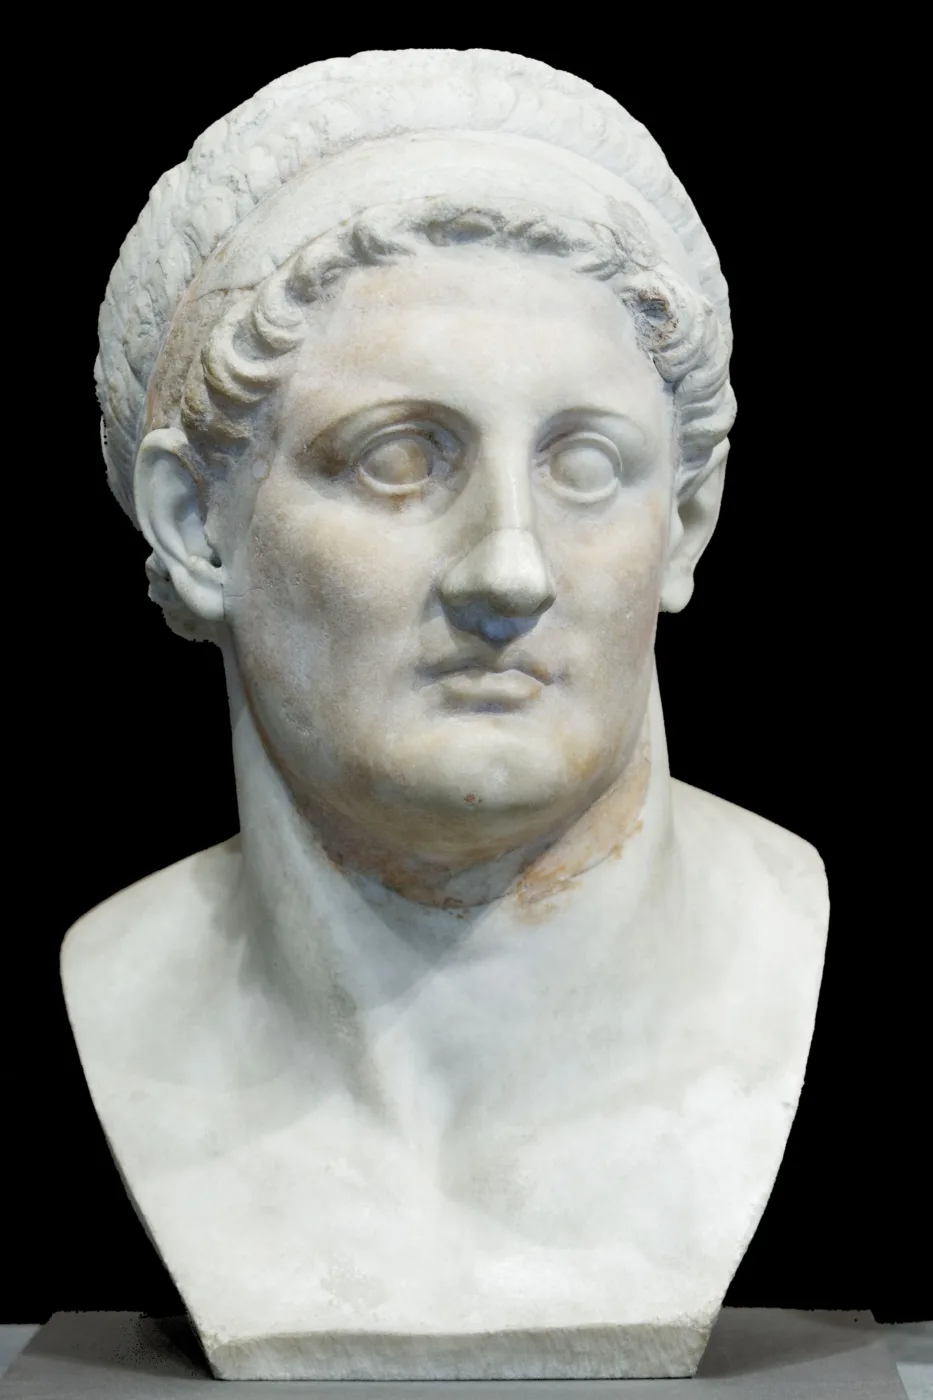 Bust of Ptolemy I Soter, the founder of the Ptolemaic dynasty founder and king of Egypt.